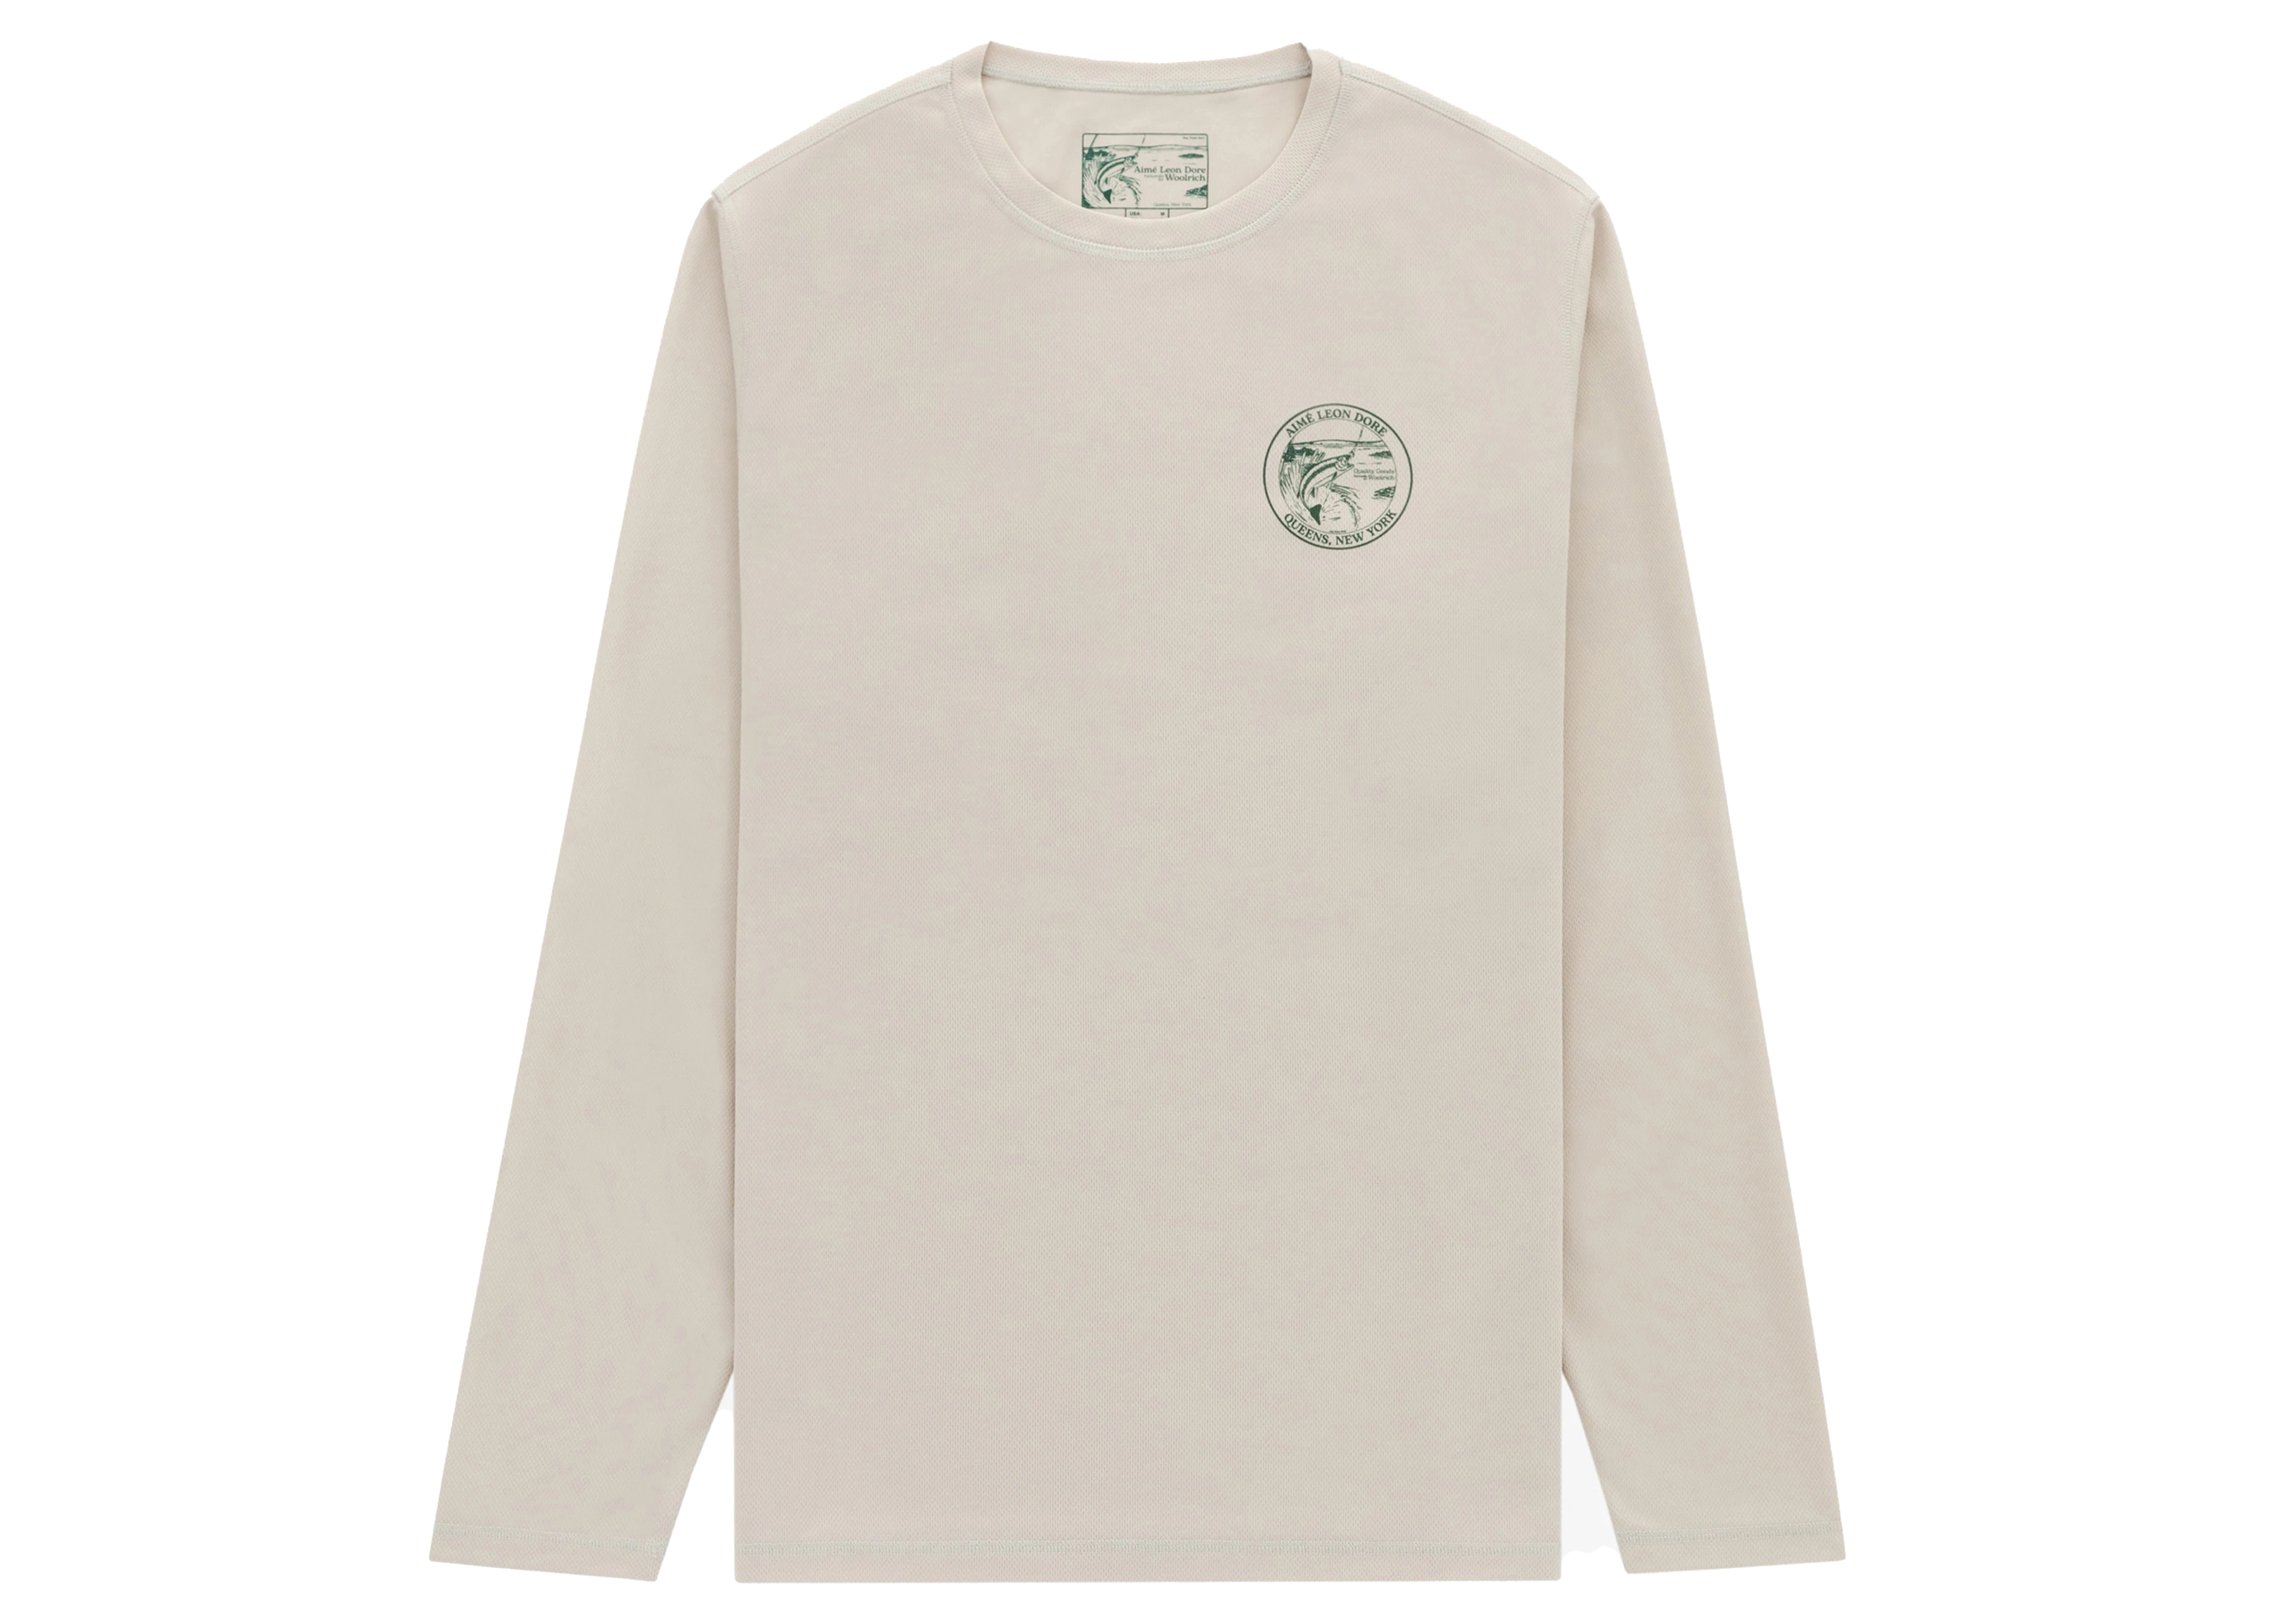 Aime Leon Dore x Woolrich Long-Sleeve Performance Tee Taupe Men's 